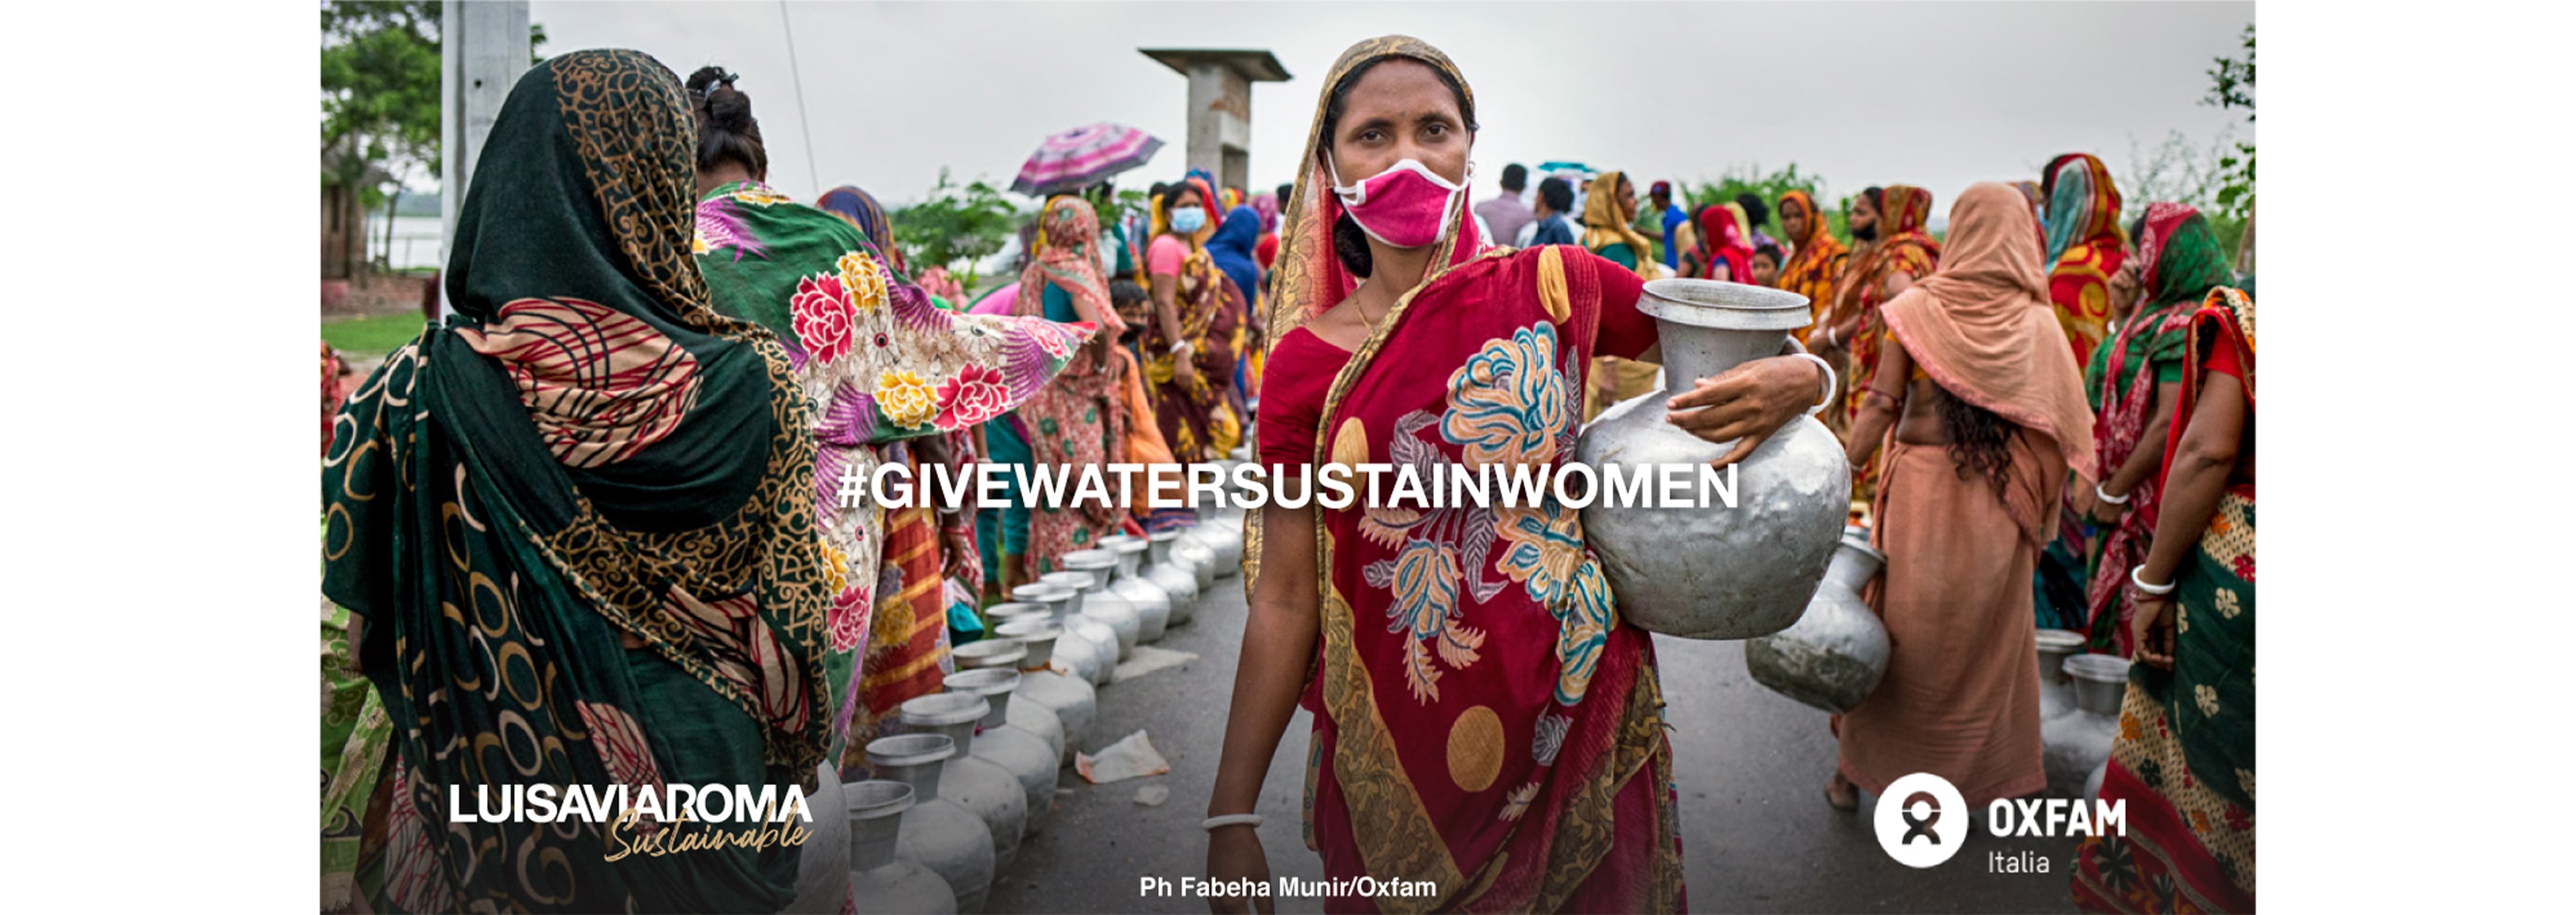 LVRSustainable & Oxfam Italy for Give Water, Sustain Women: Dorothy’s Story